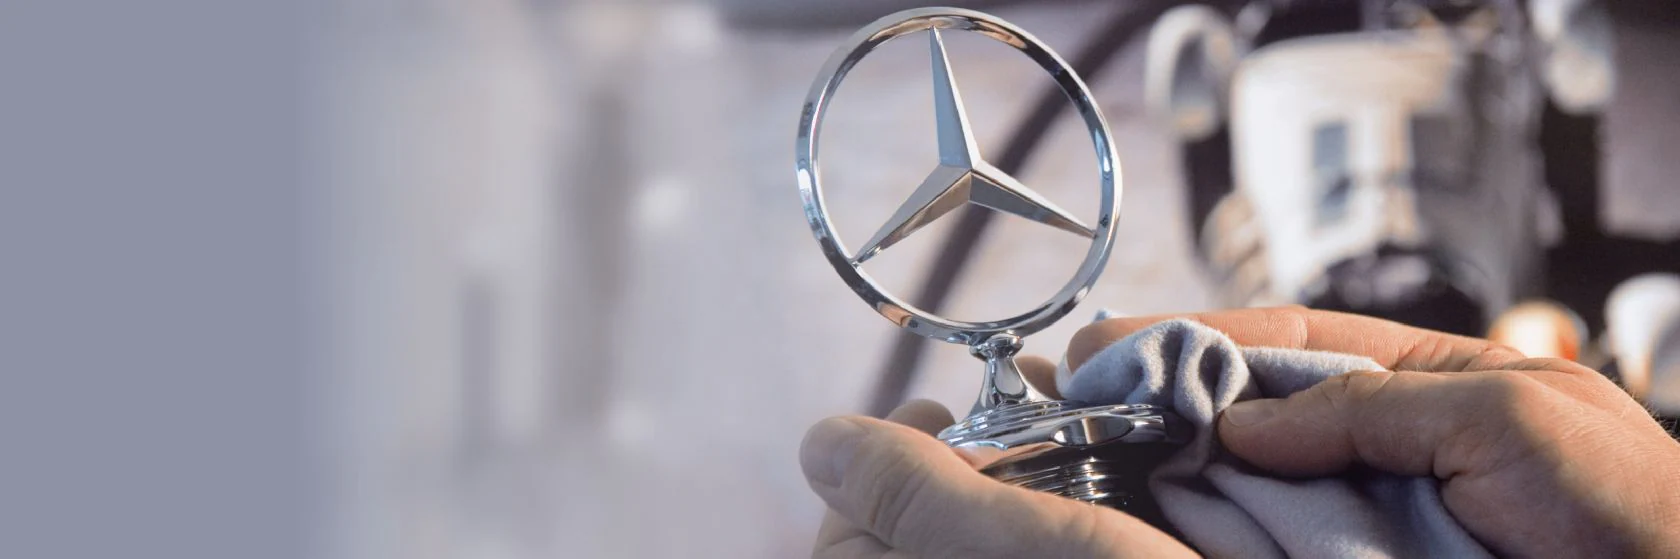 Mercedes-Benz: pros and cons of owning the German car